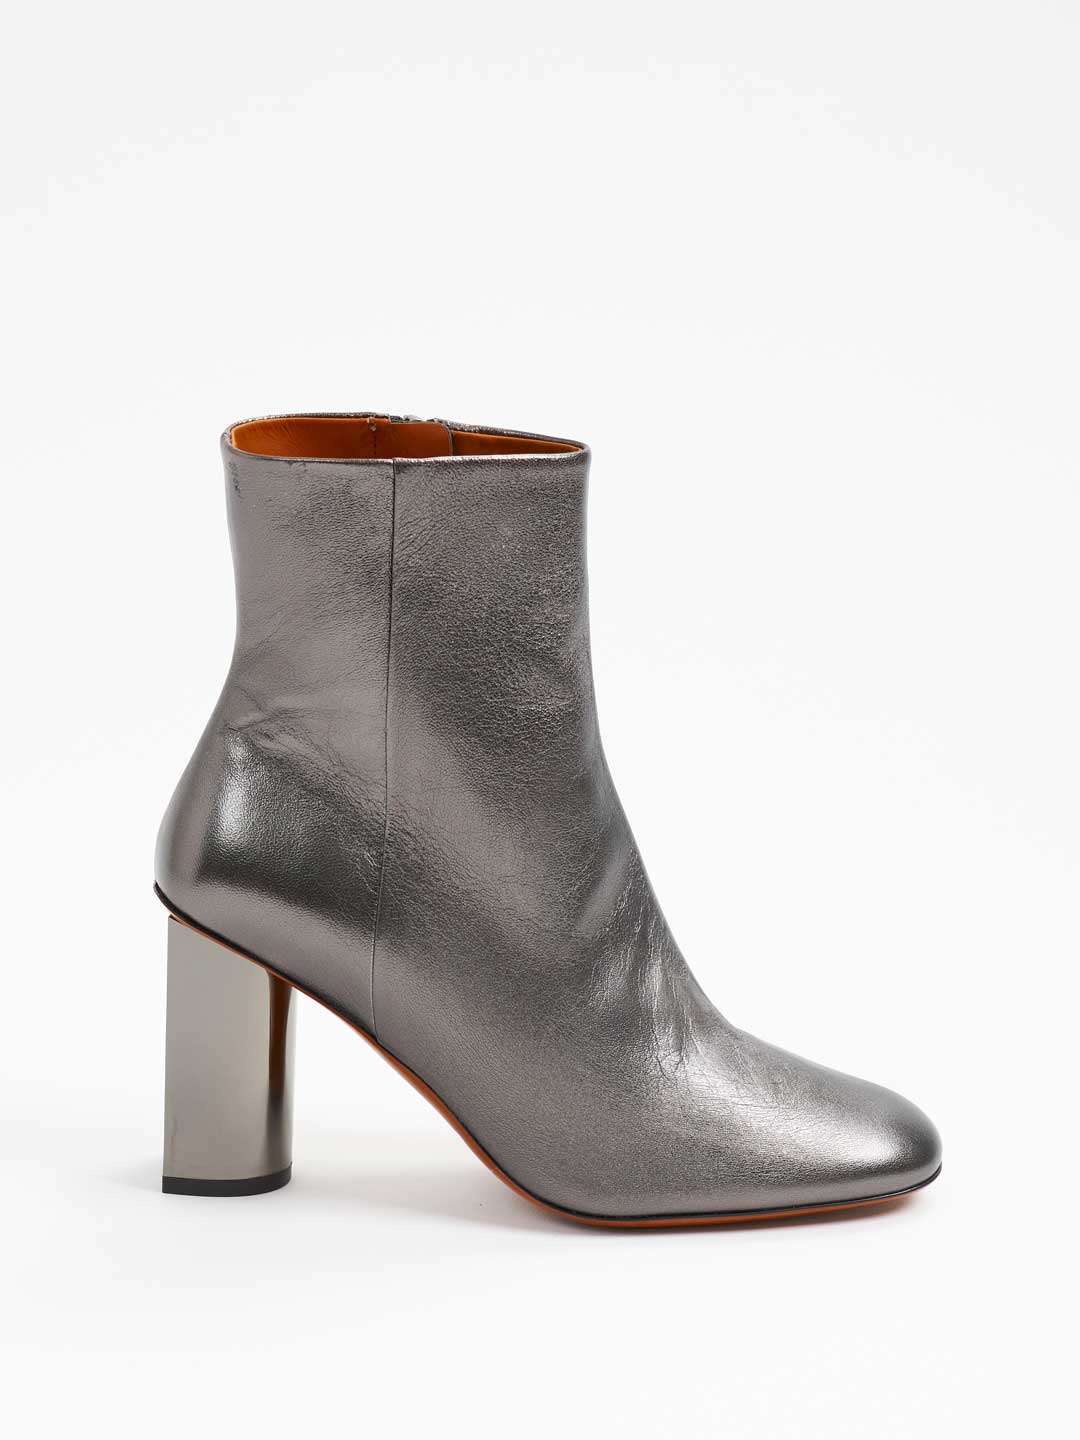 JUDIE Metallic Leather Ankle Boots - Grey